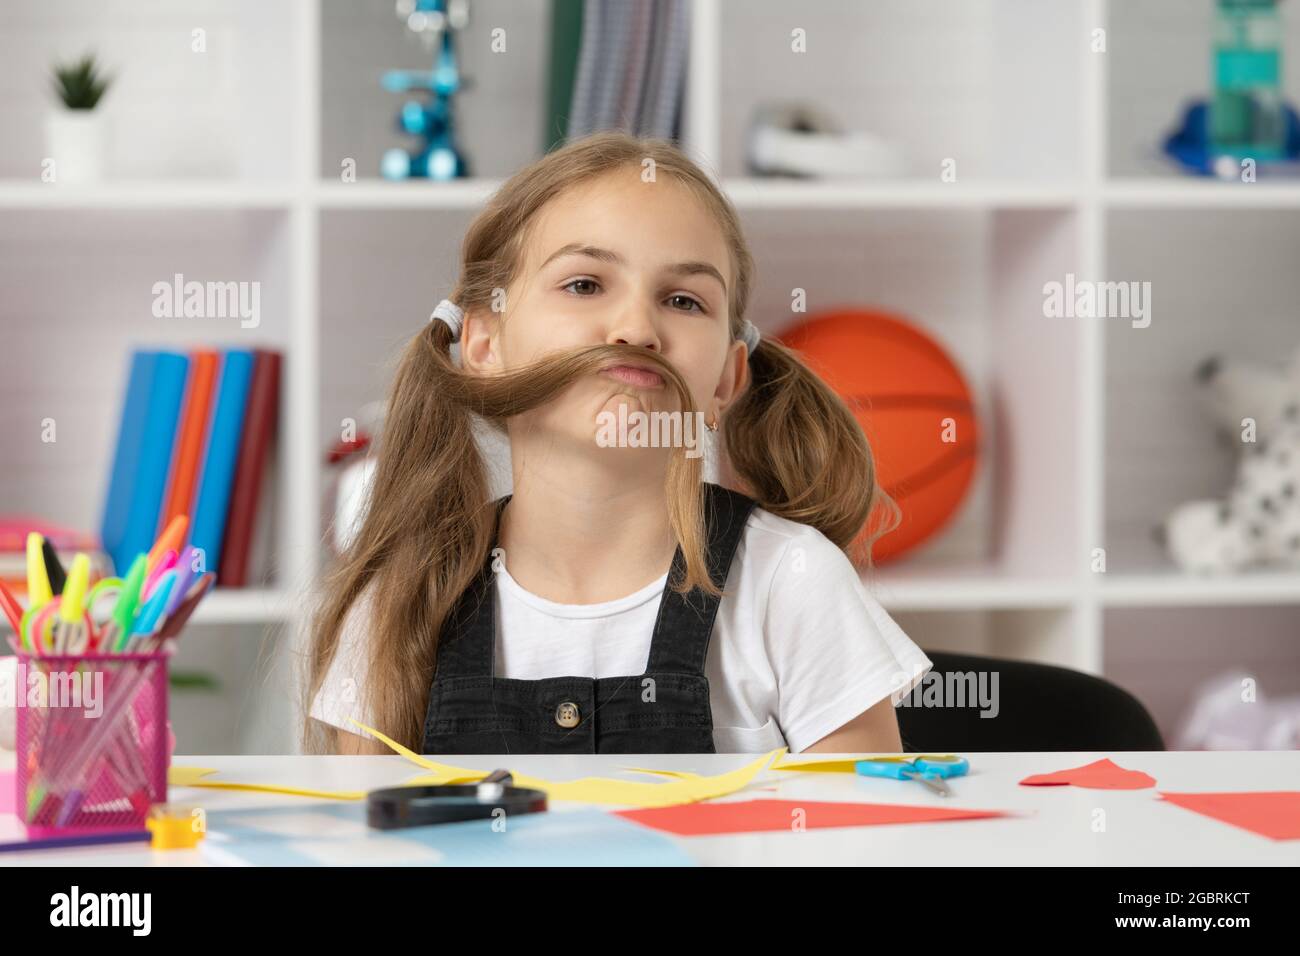 funny child having fun with long hair pony tail at school lesson in classroom wear uniform, fun Stock Photo